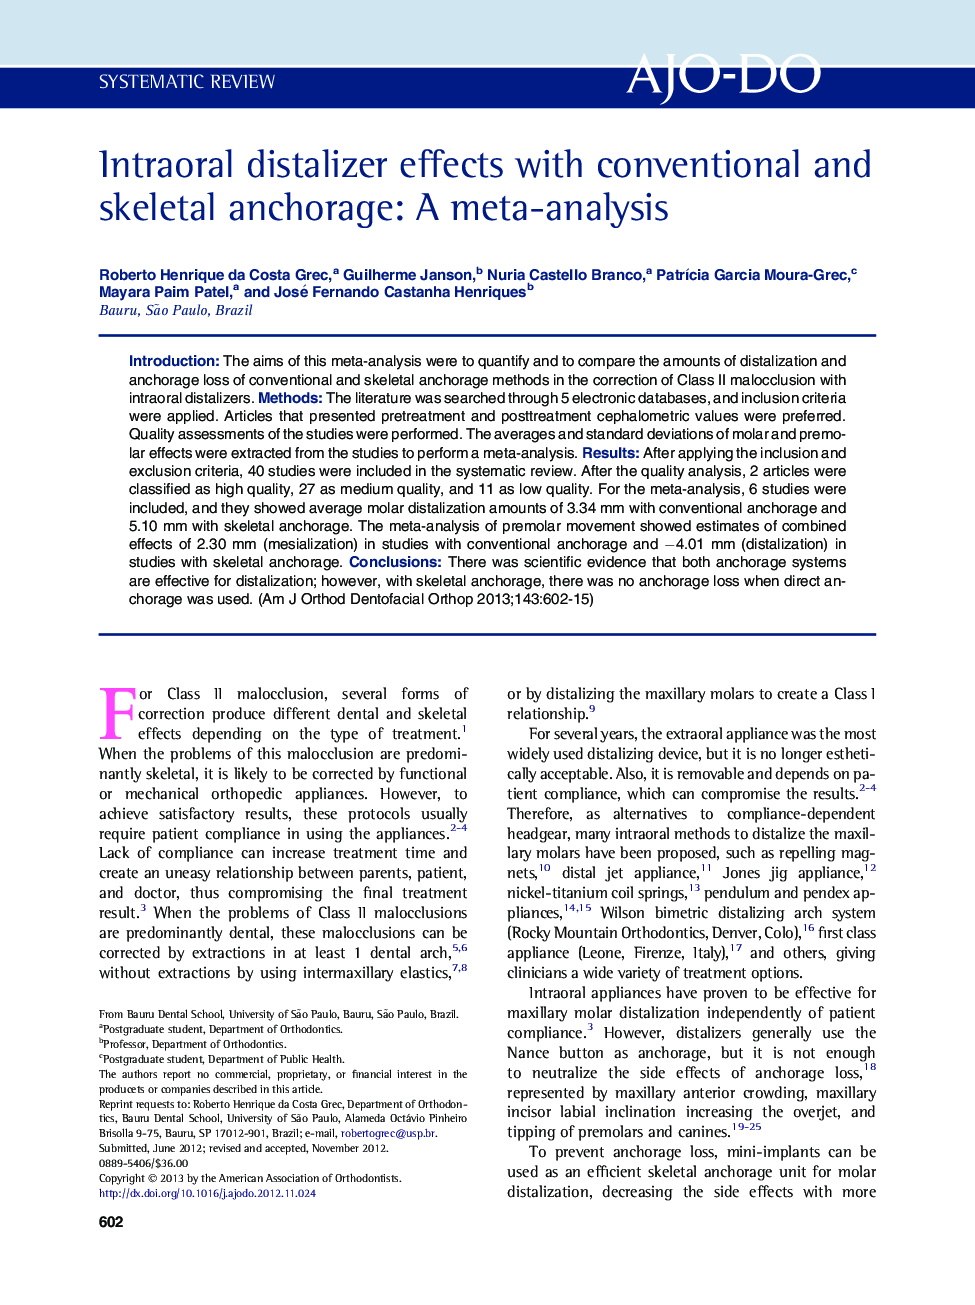 Intraoral distalizer effects with conventional and skeletal anchorage: A meta-analysis 